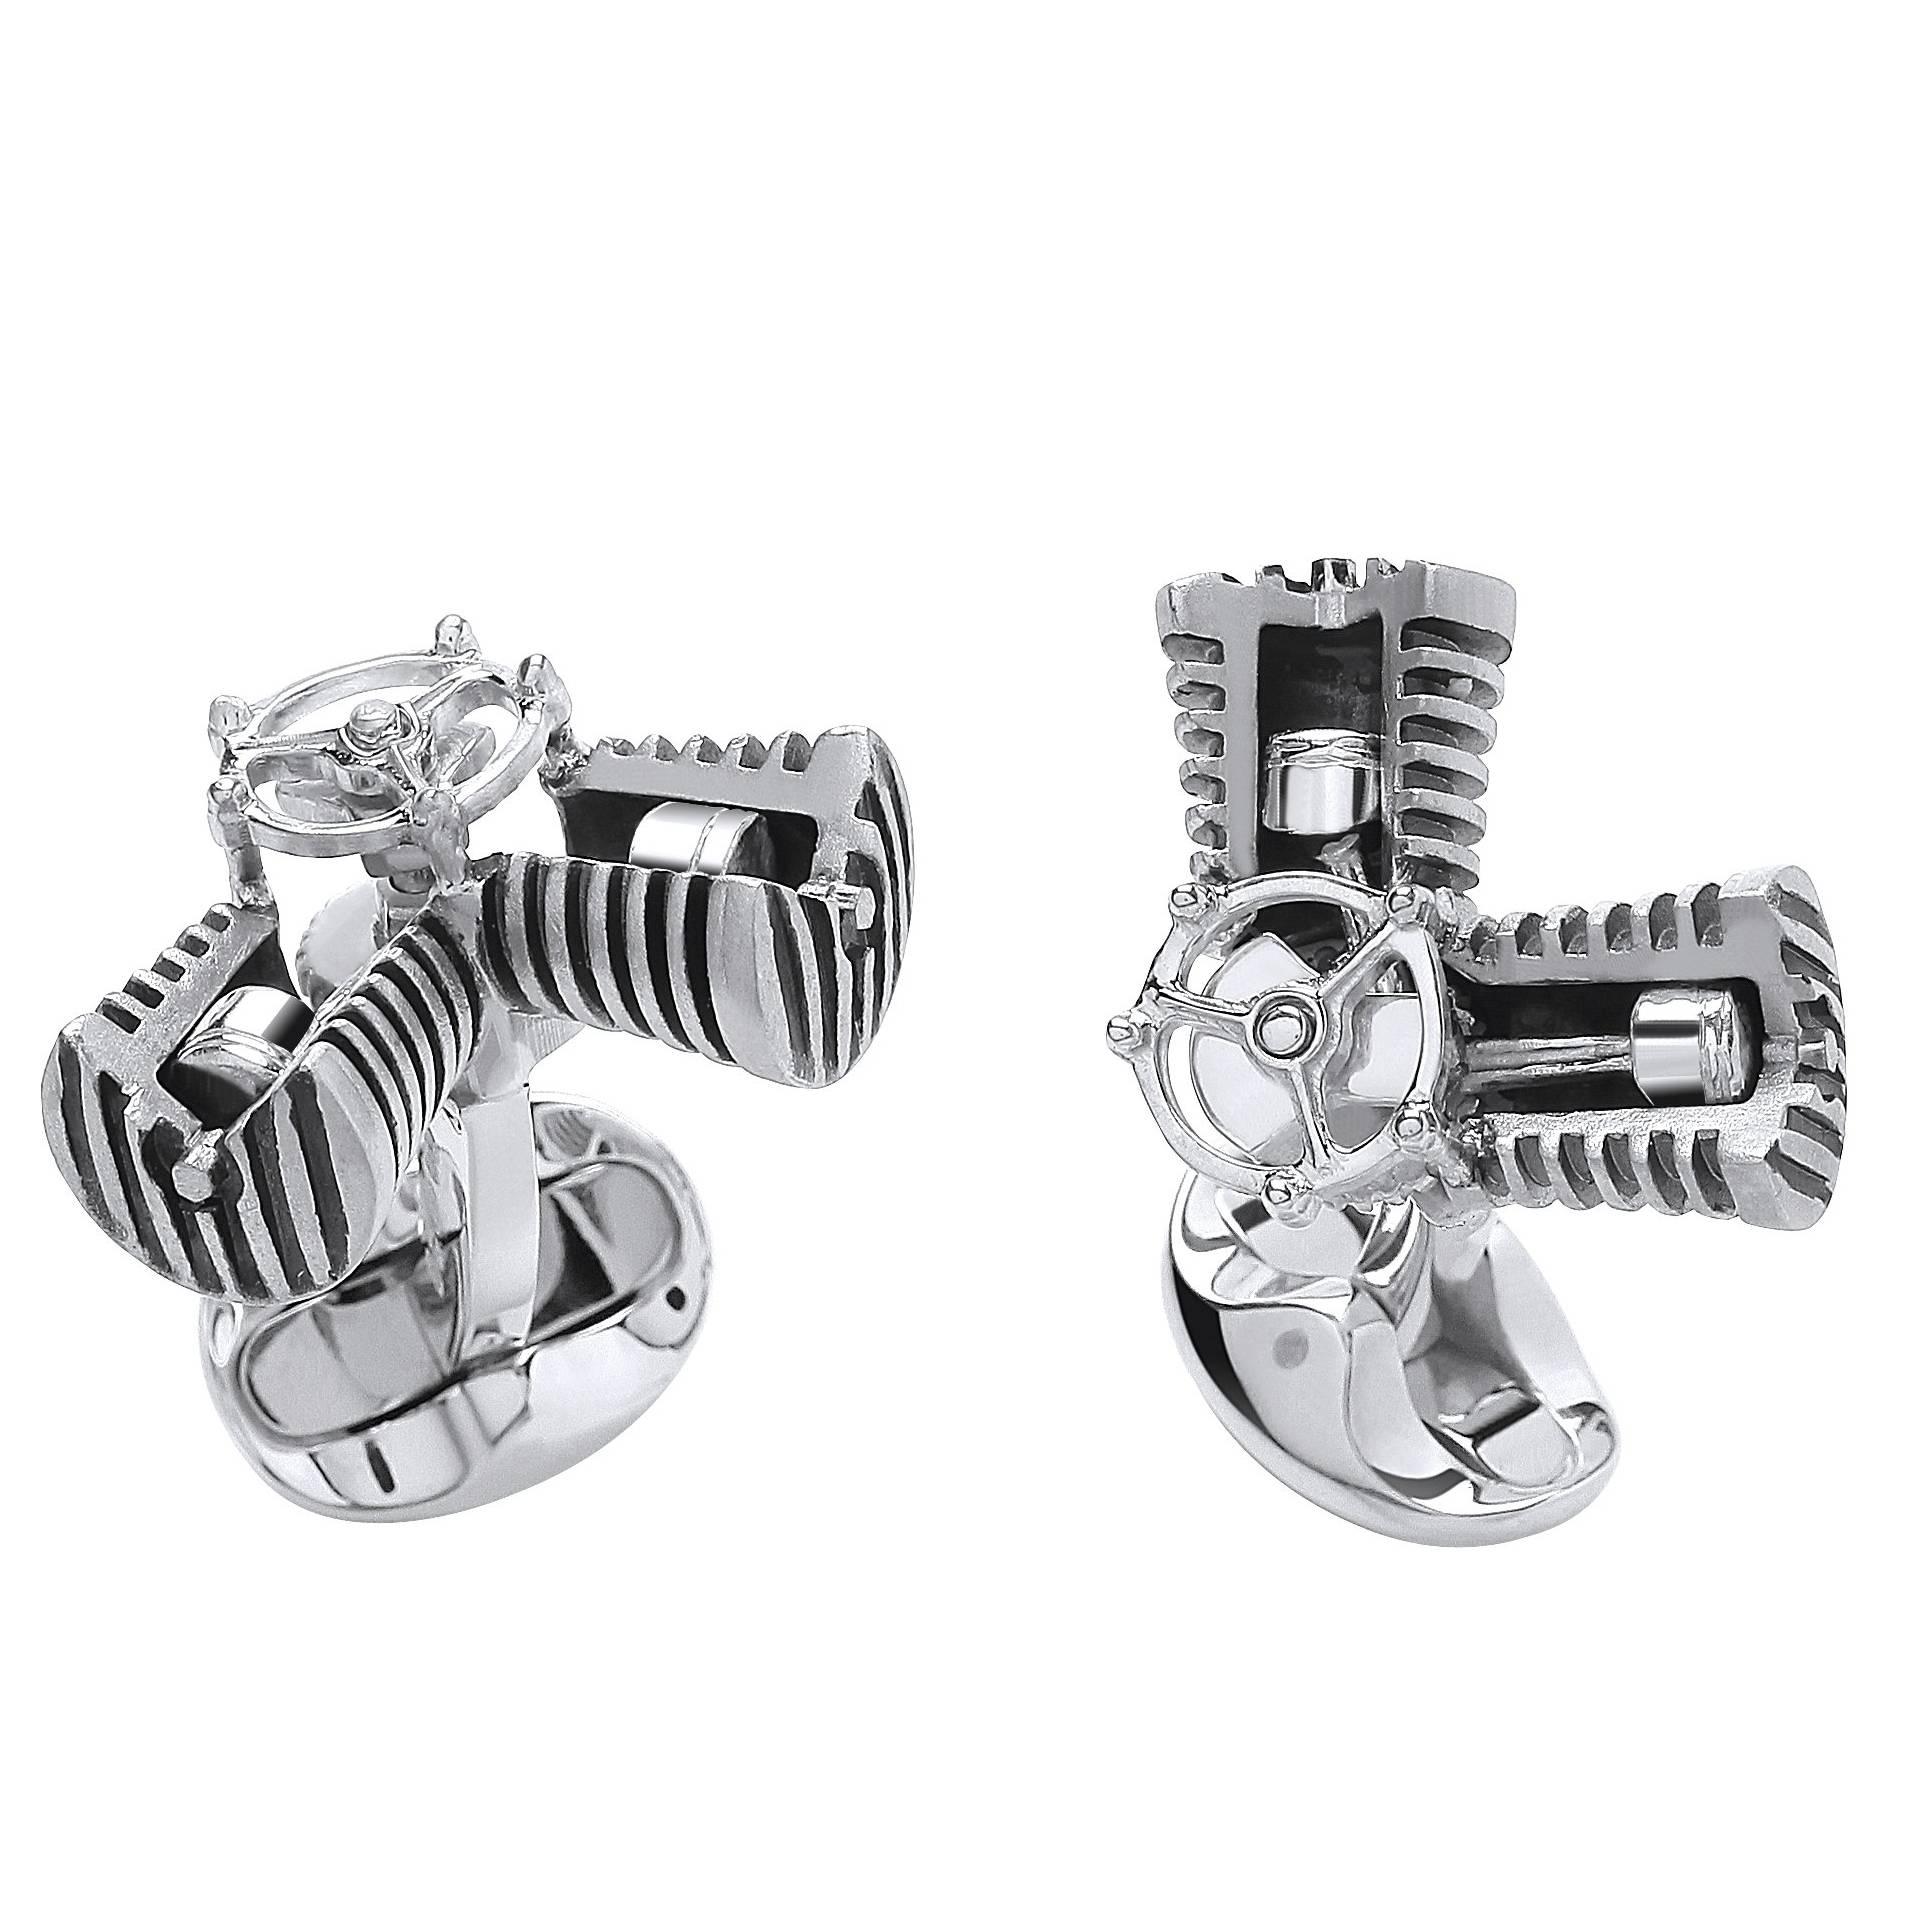 Deakin & Francis Silver and Rose Gold Piston Engine Cufflinks              